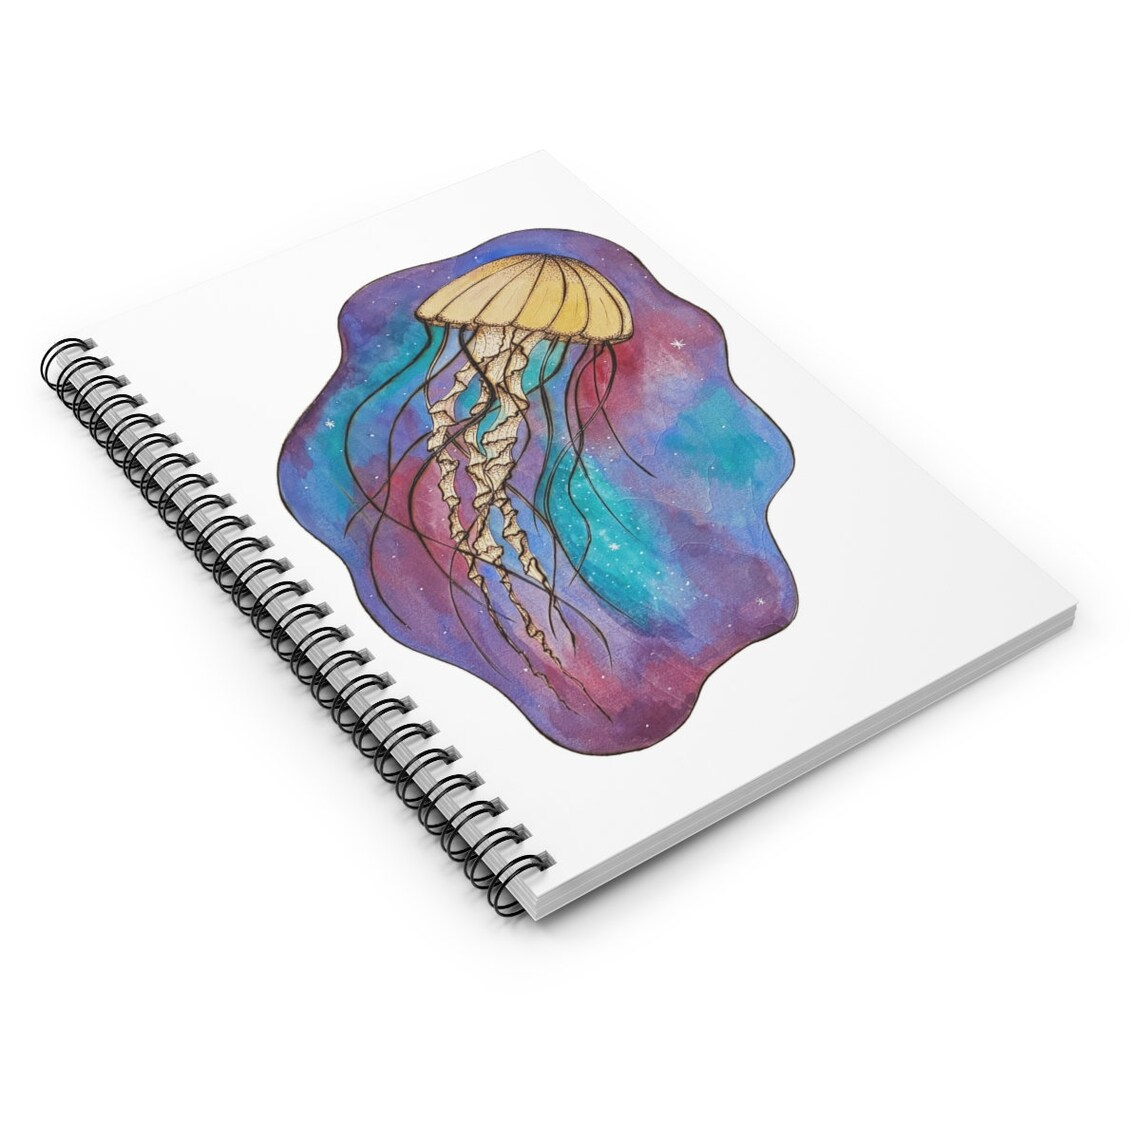 jellyfish journal - With the tees